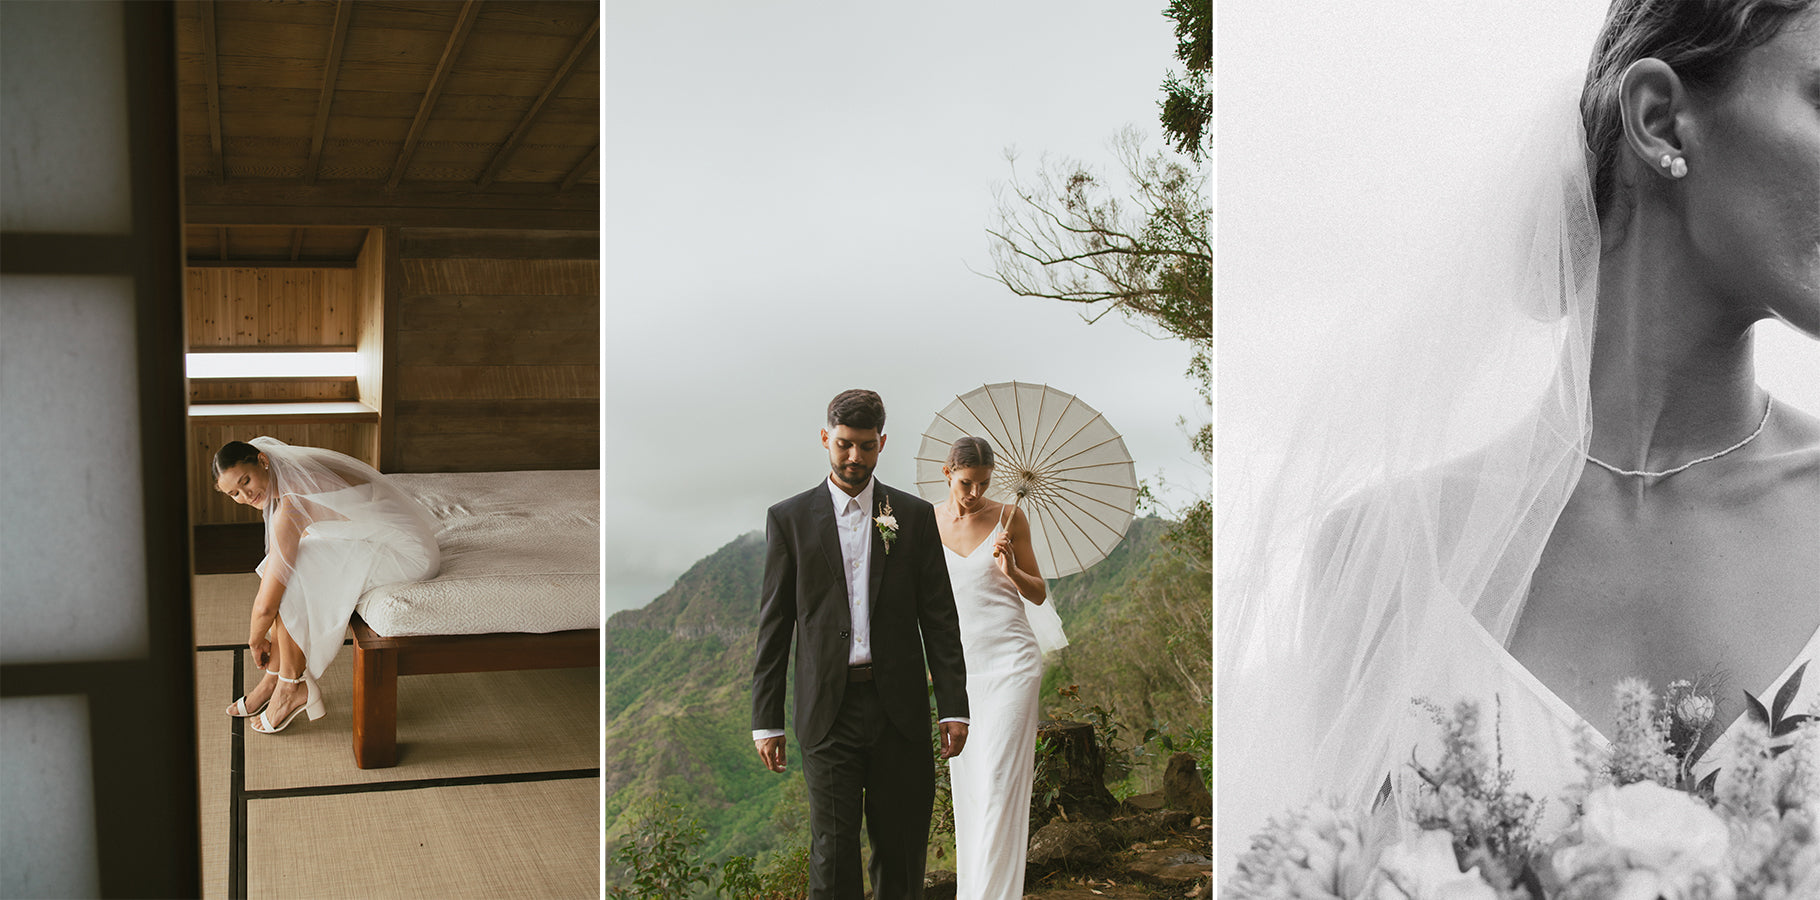 Montage of bride getting ready in cabin and bride and groom walking in mountains on Oahu